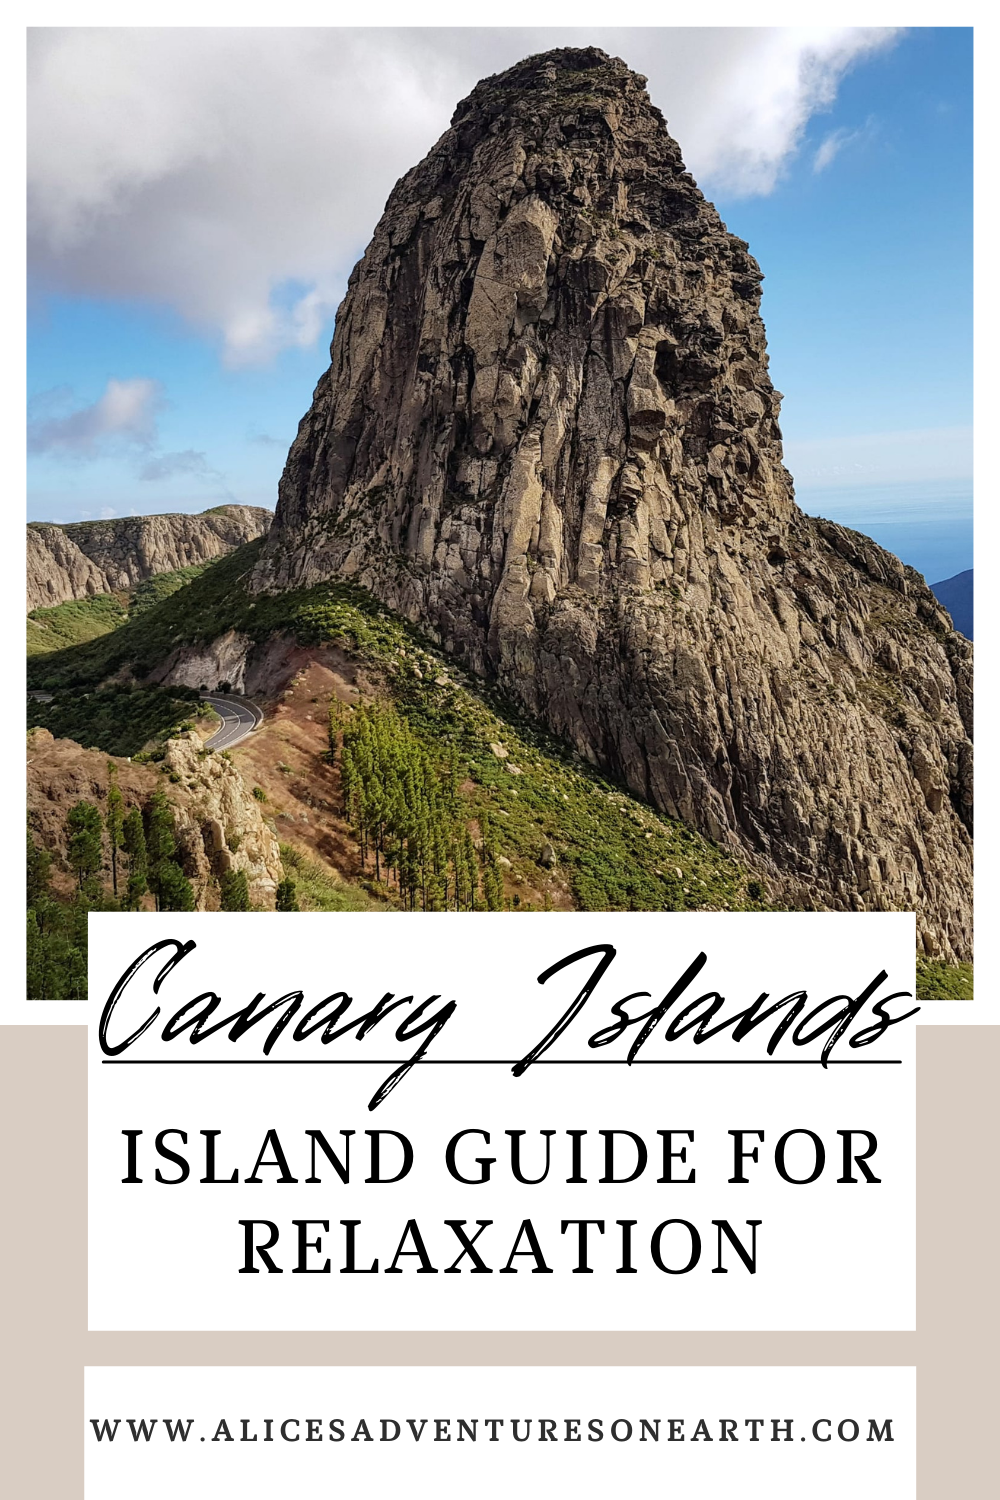 Looking for a relaxing island vacation? Look no further than the Canary islands. Here is your guide for a relaxing off the beaten path vacation to this spanish island chain. #canaryislands #relaxingvacation